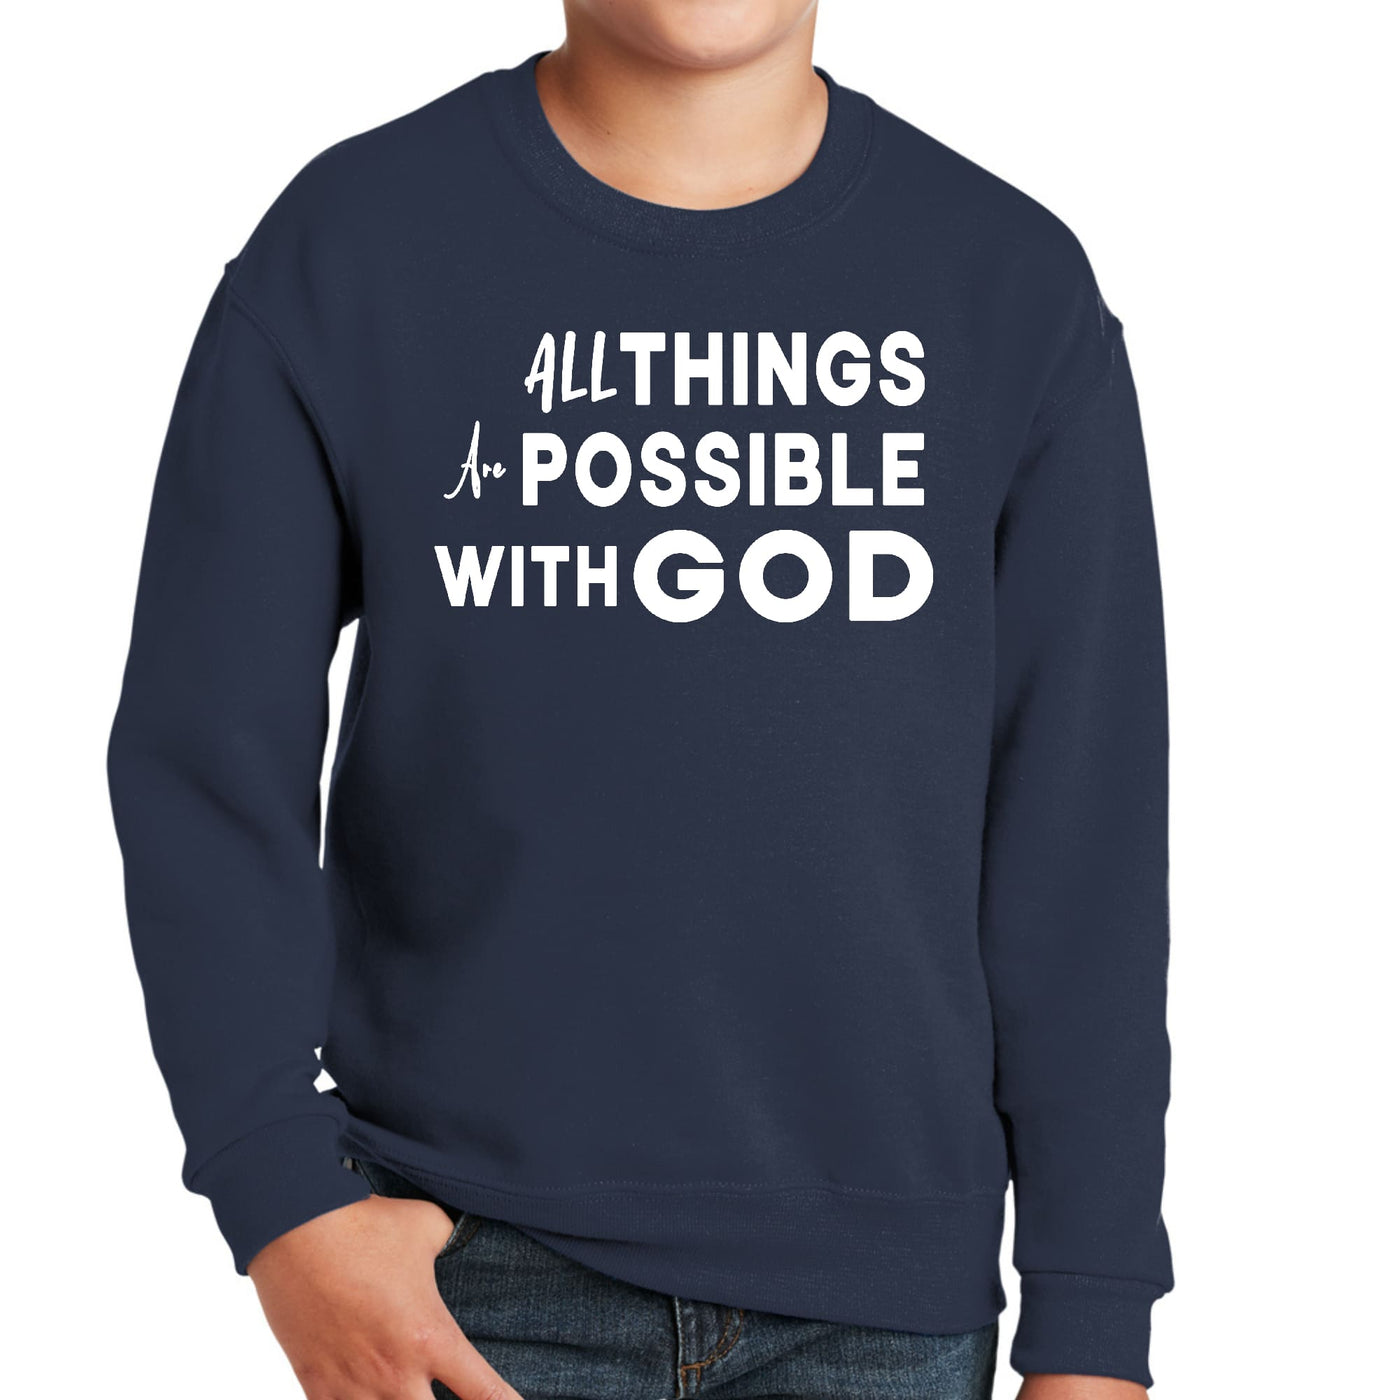 Youth Graphic Sweatshirt All Things Are Possible With God - Youth | Sweatshirts